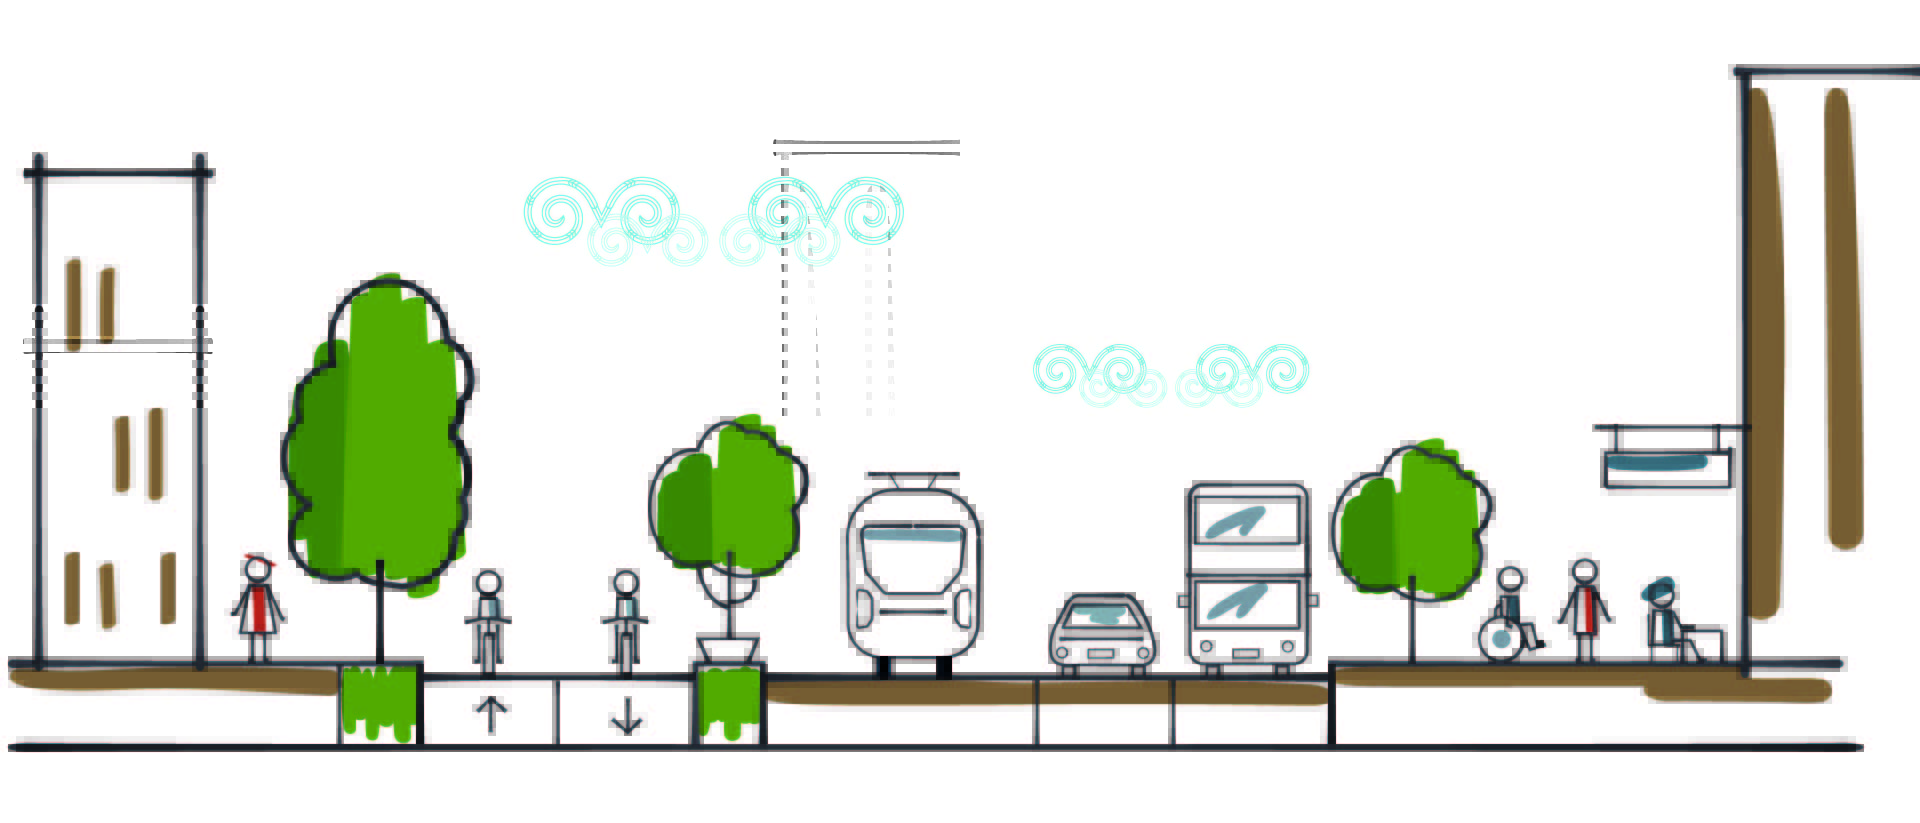 Drawing of people in urban area, walking, boarding a tram, riding an electric freight vehicle, and sitting on street furniture.